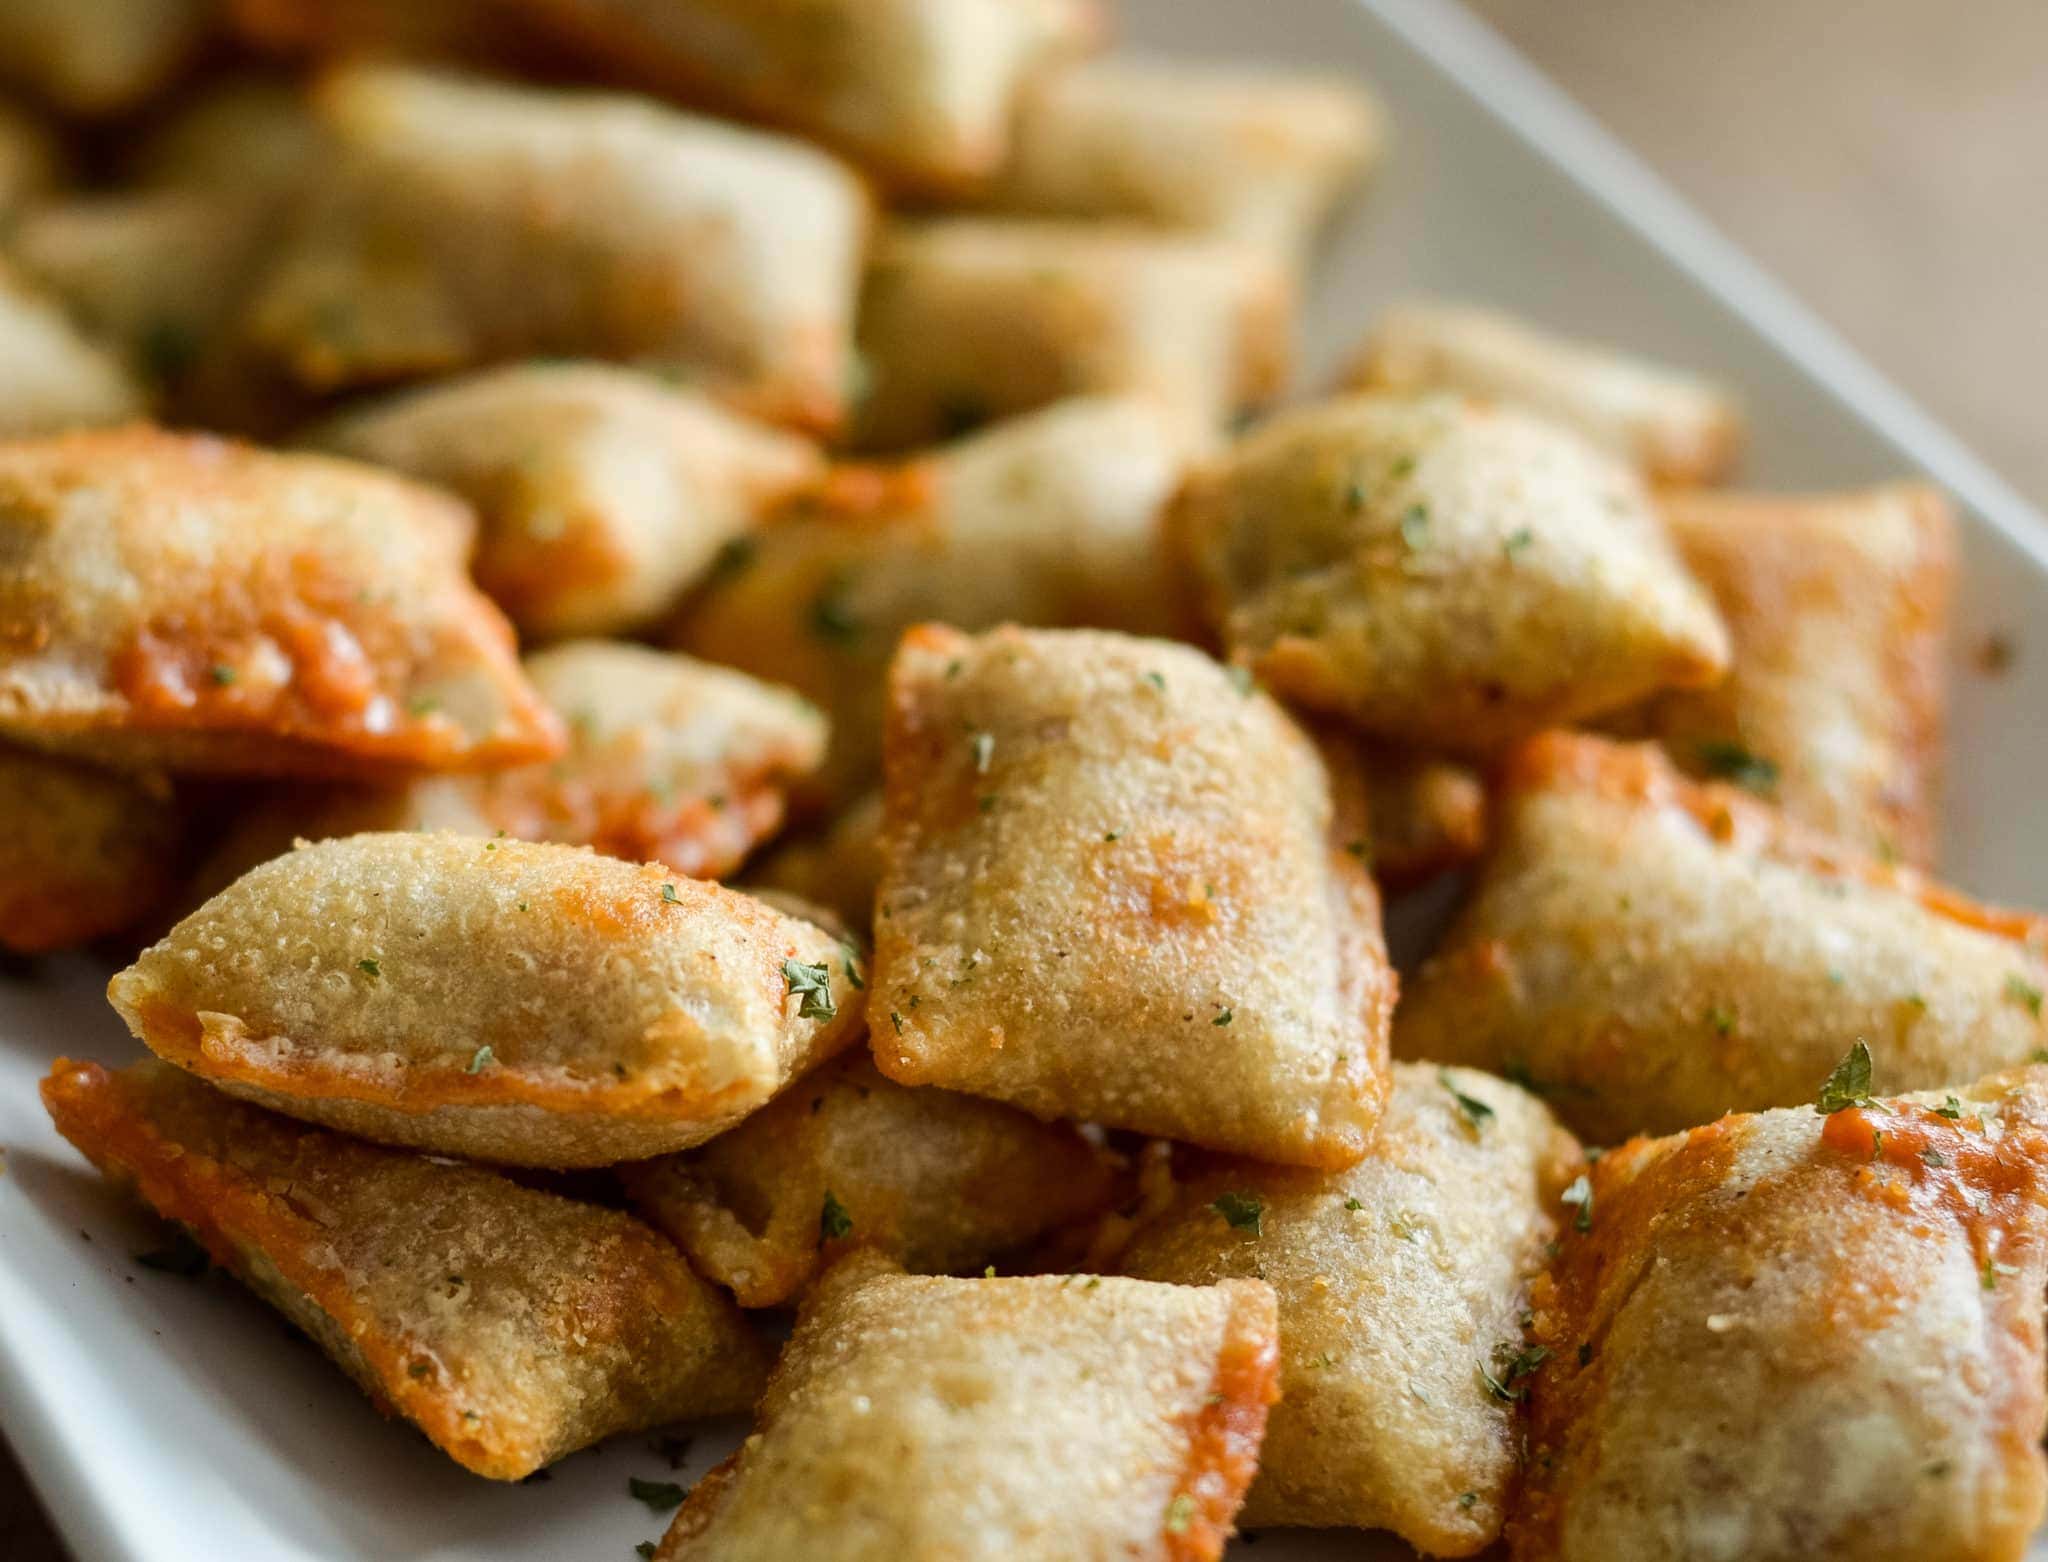 Can You Fix Pizza Rolls In The Air Fryer